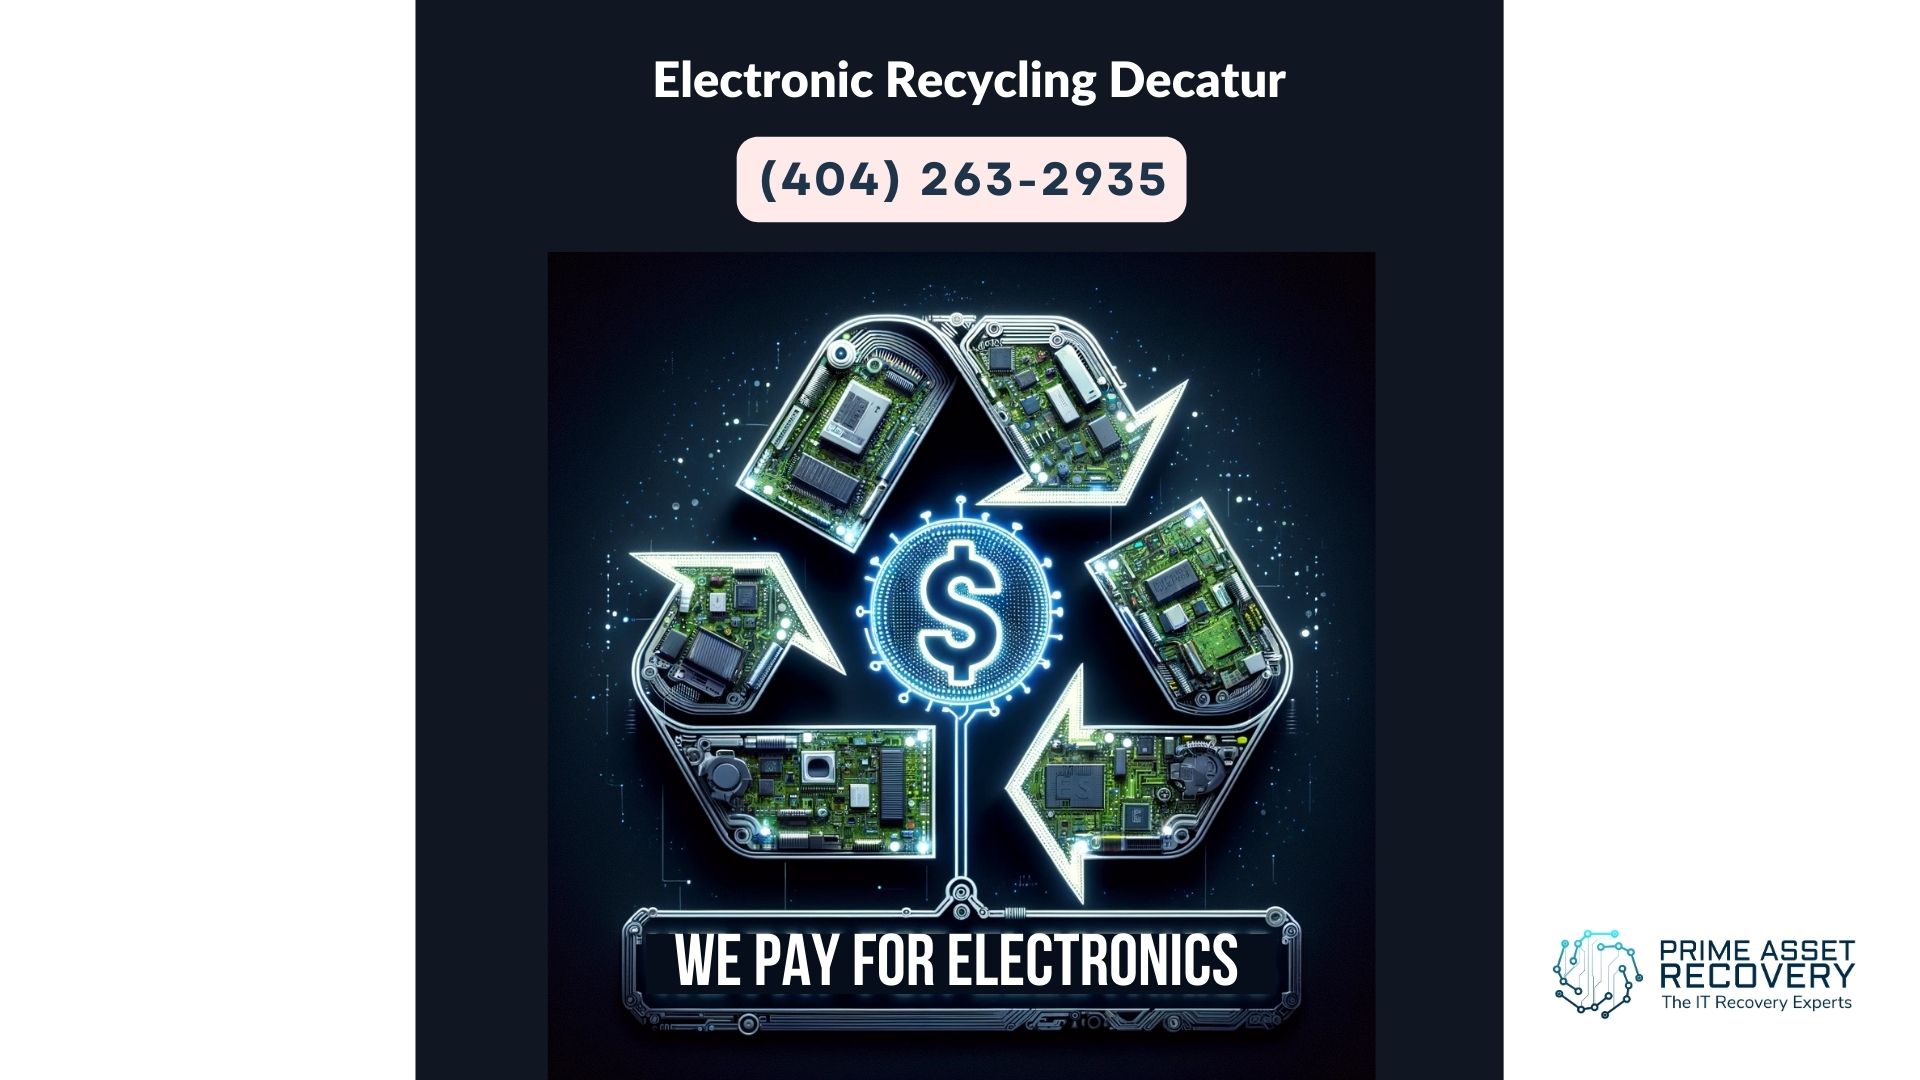 Computer Electronic Recycling Decatur GA - Prime Asset Recovery Your Partner in Responsible Electronics Recycling